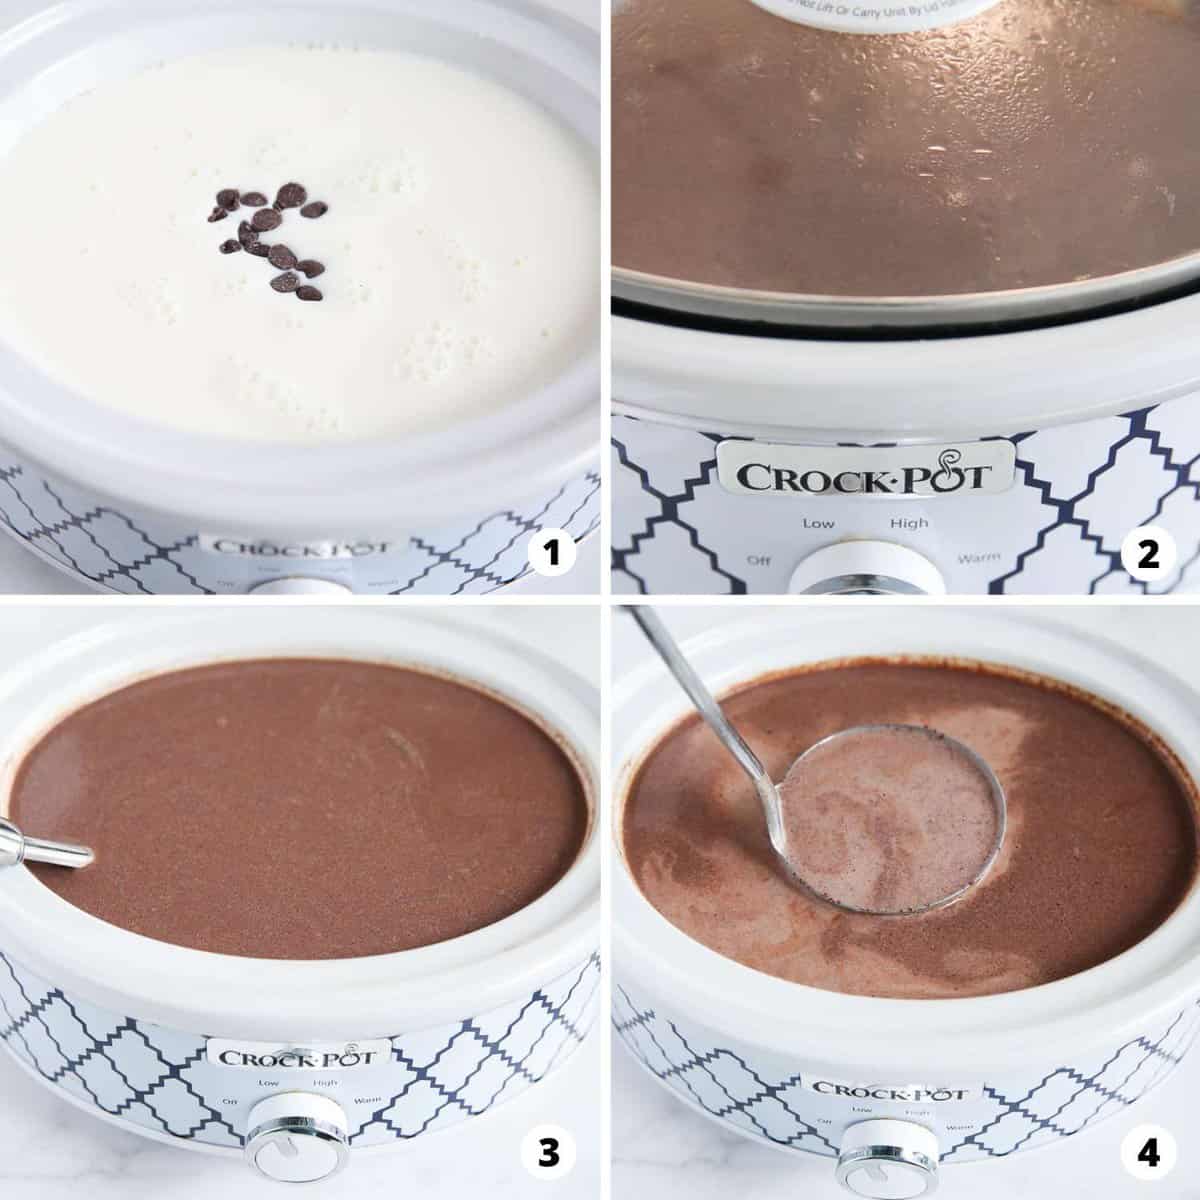 Showing how to make crockpot hot chocolate in a 4 step collage.